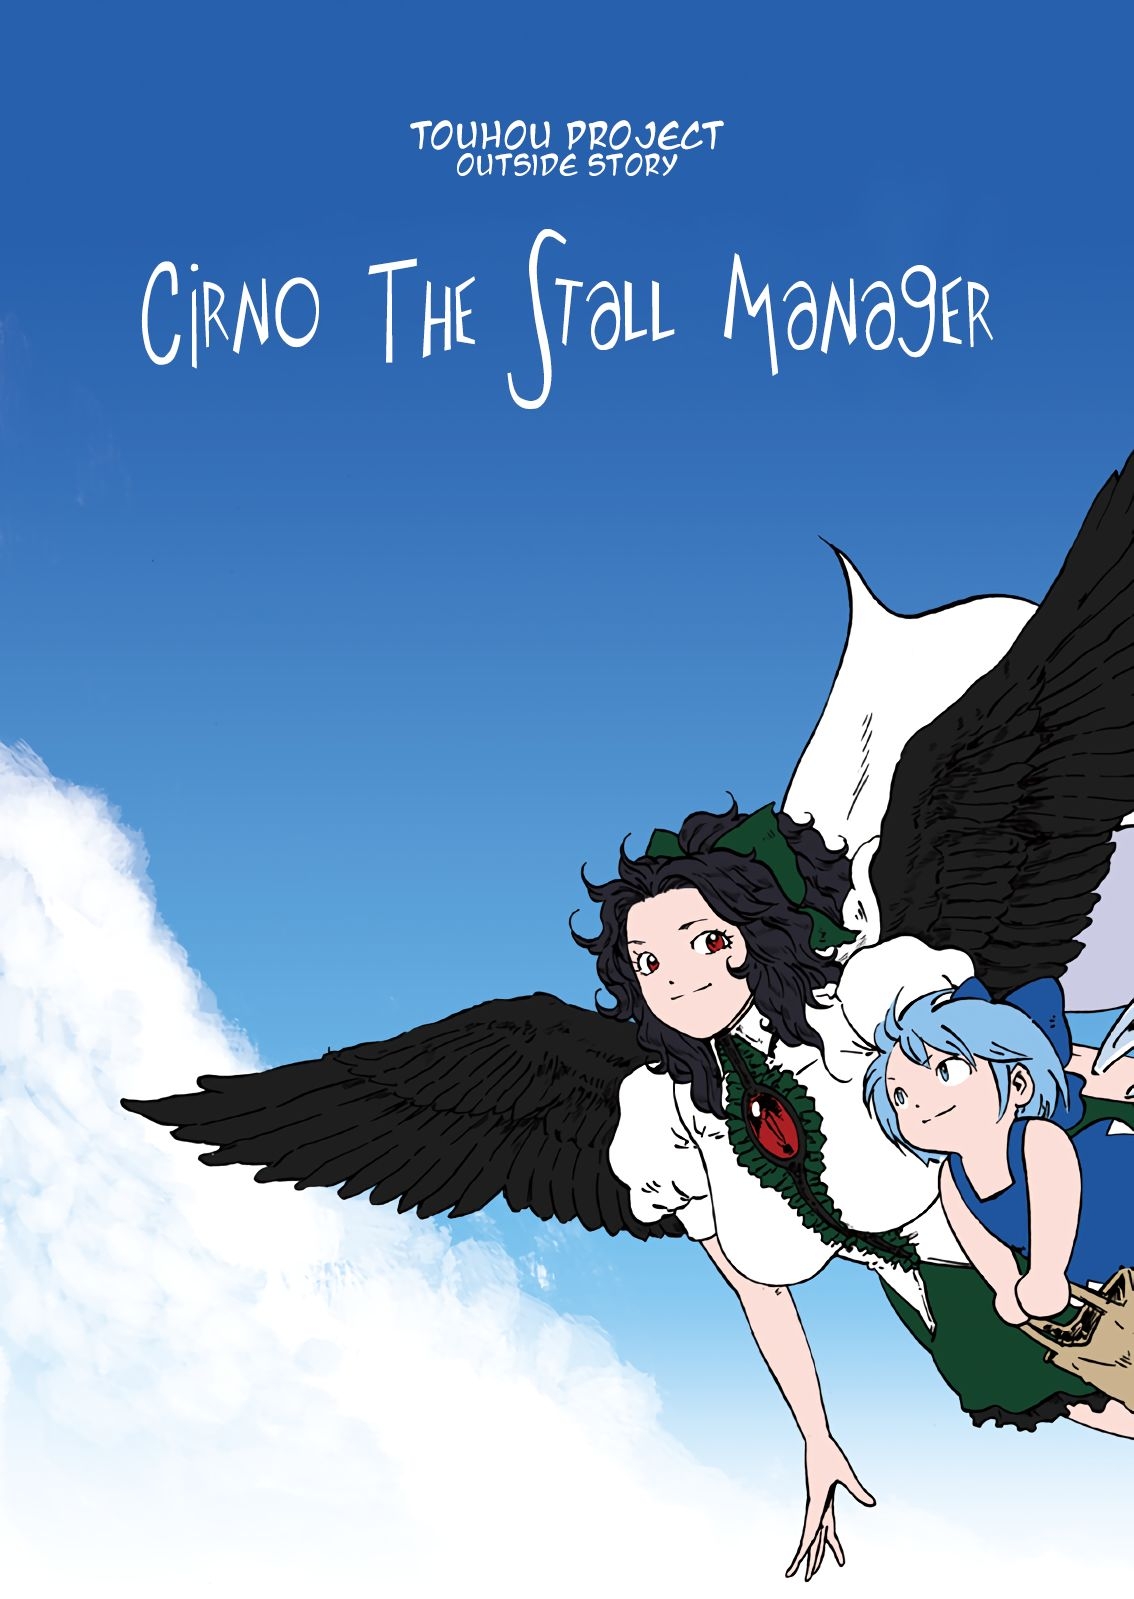 [YSYSTUDIO ((YsY)s)] Cirno Tenchou | Cirno the Stall Manager (Touhou Project) [English] [Digital] 0